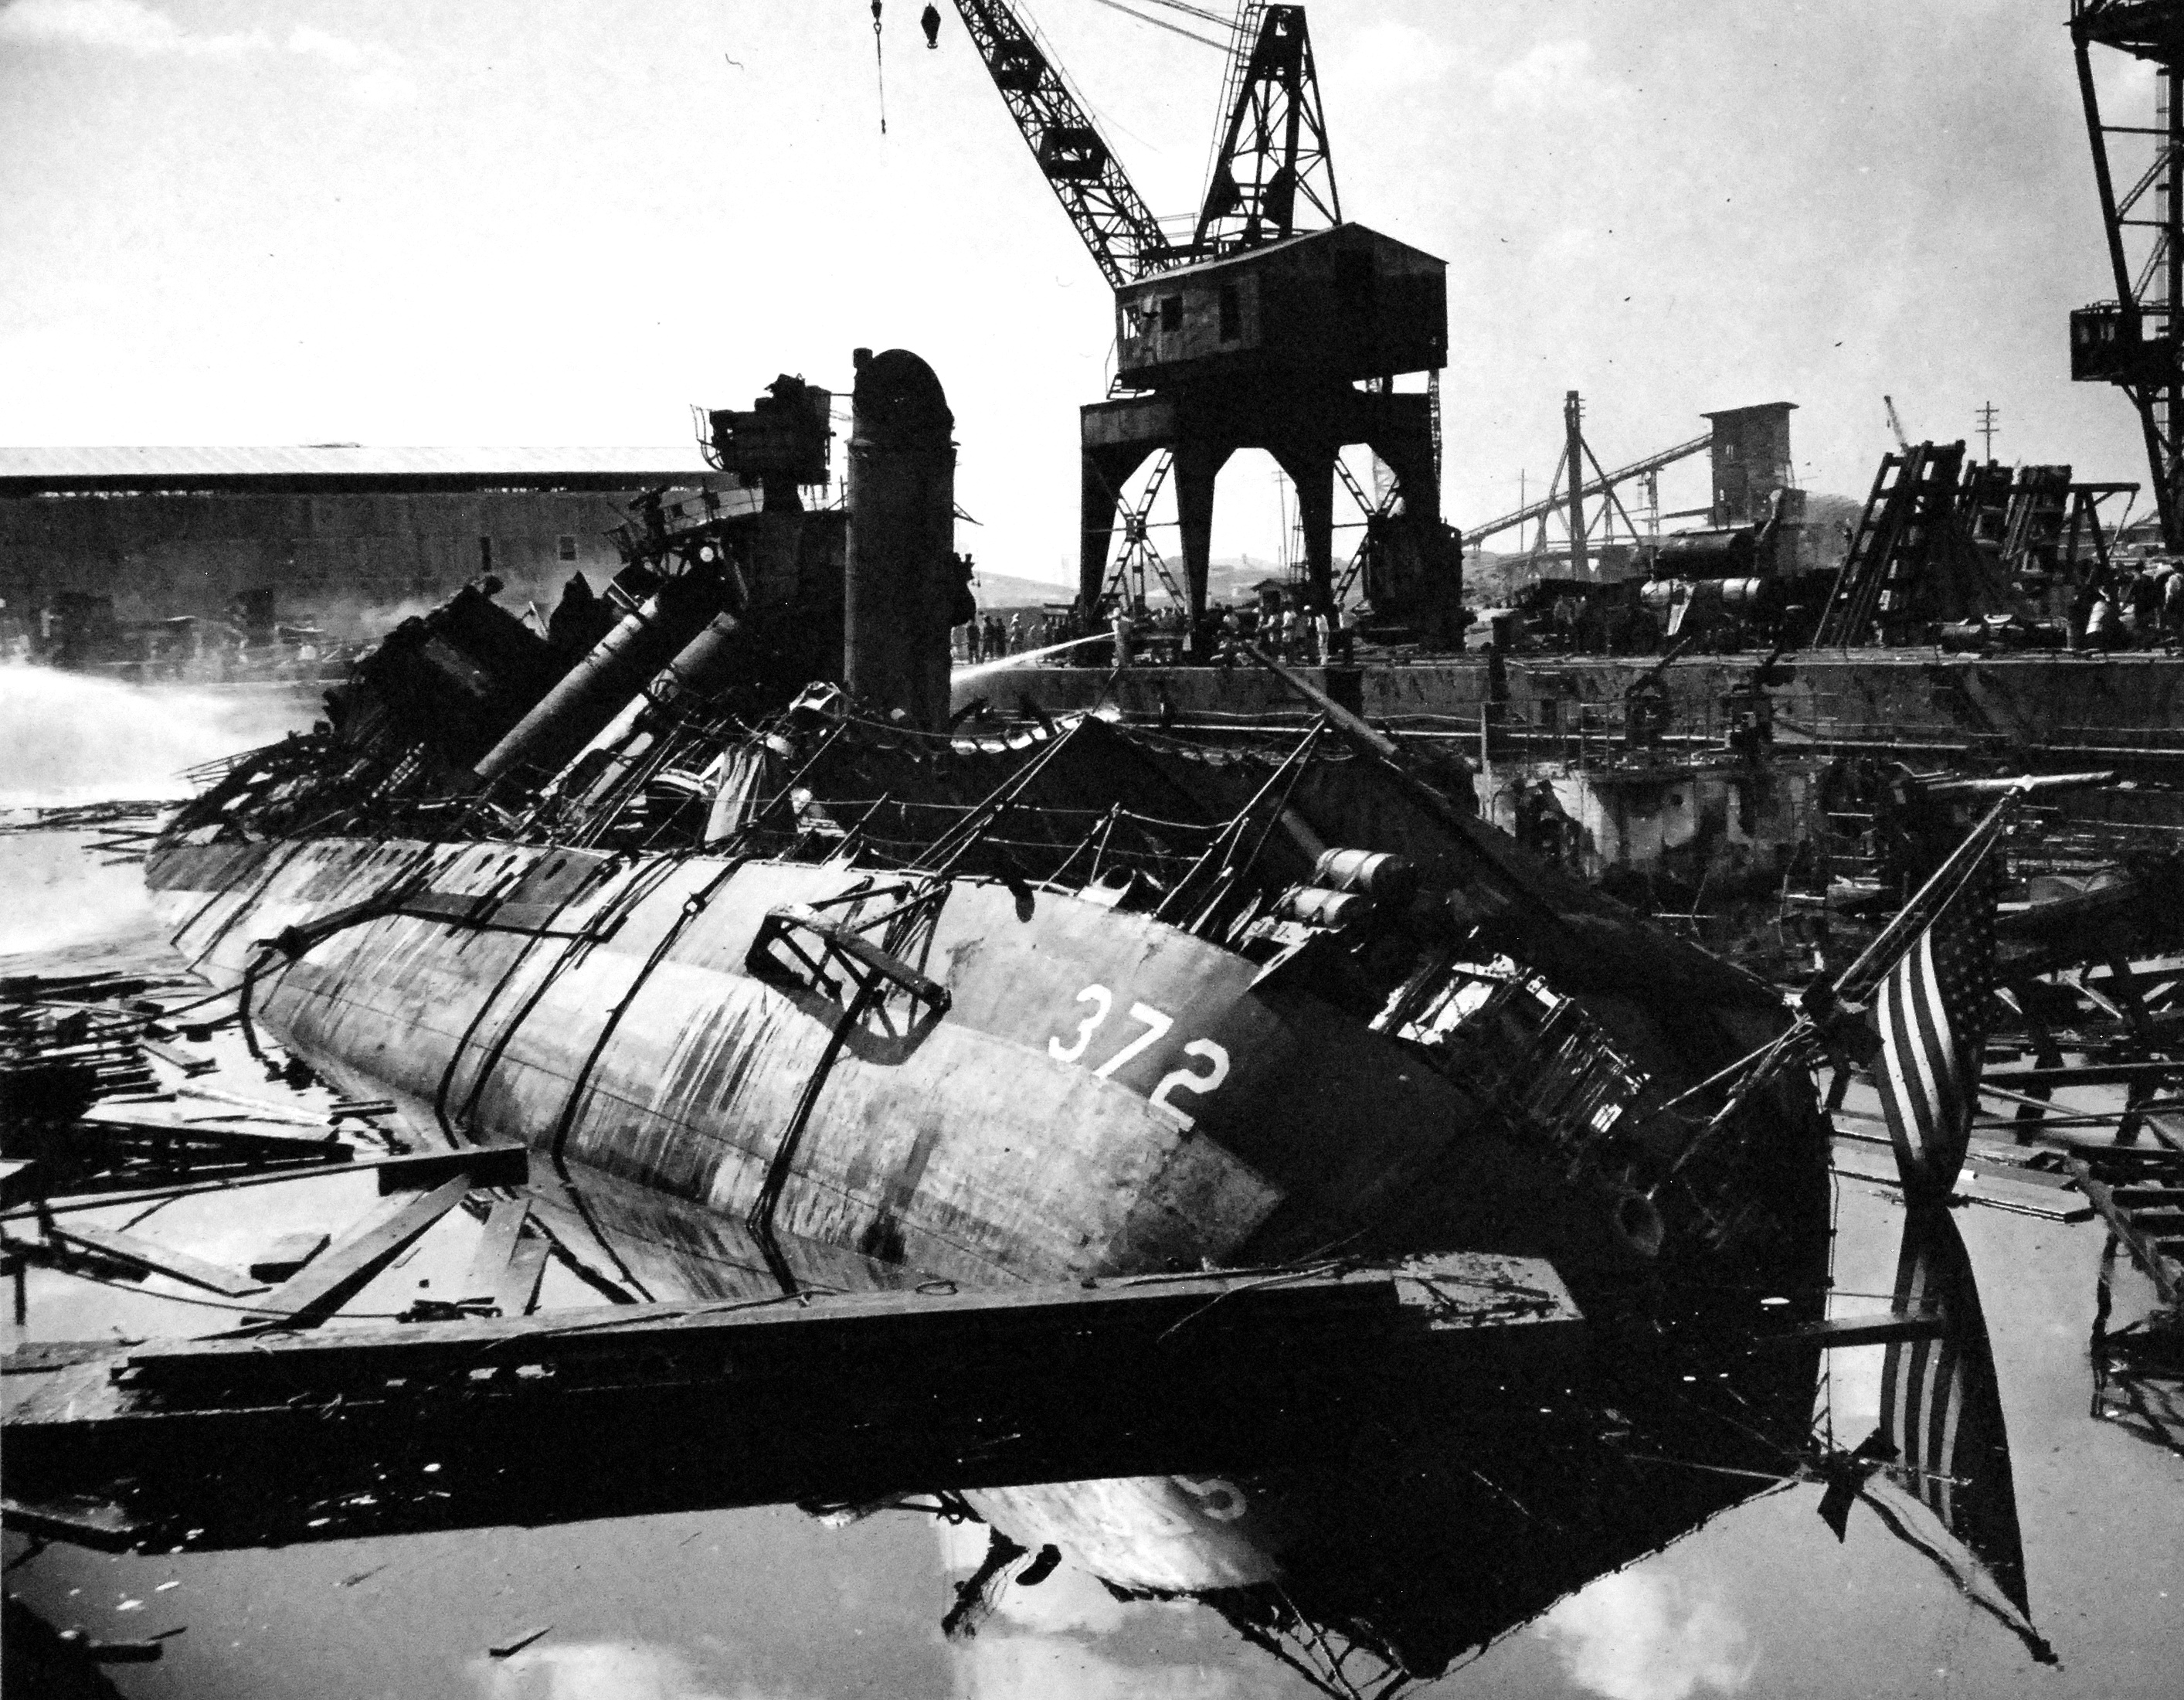 Wrecks of destroyers Downes and Cassin in Drydock One at Pearl Harbor Navy Yard, 7 Dec 1941, photo 5 of 5